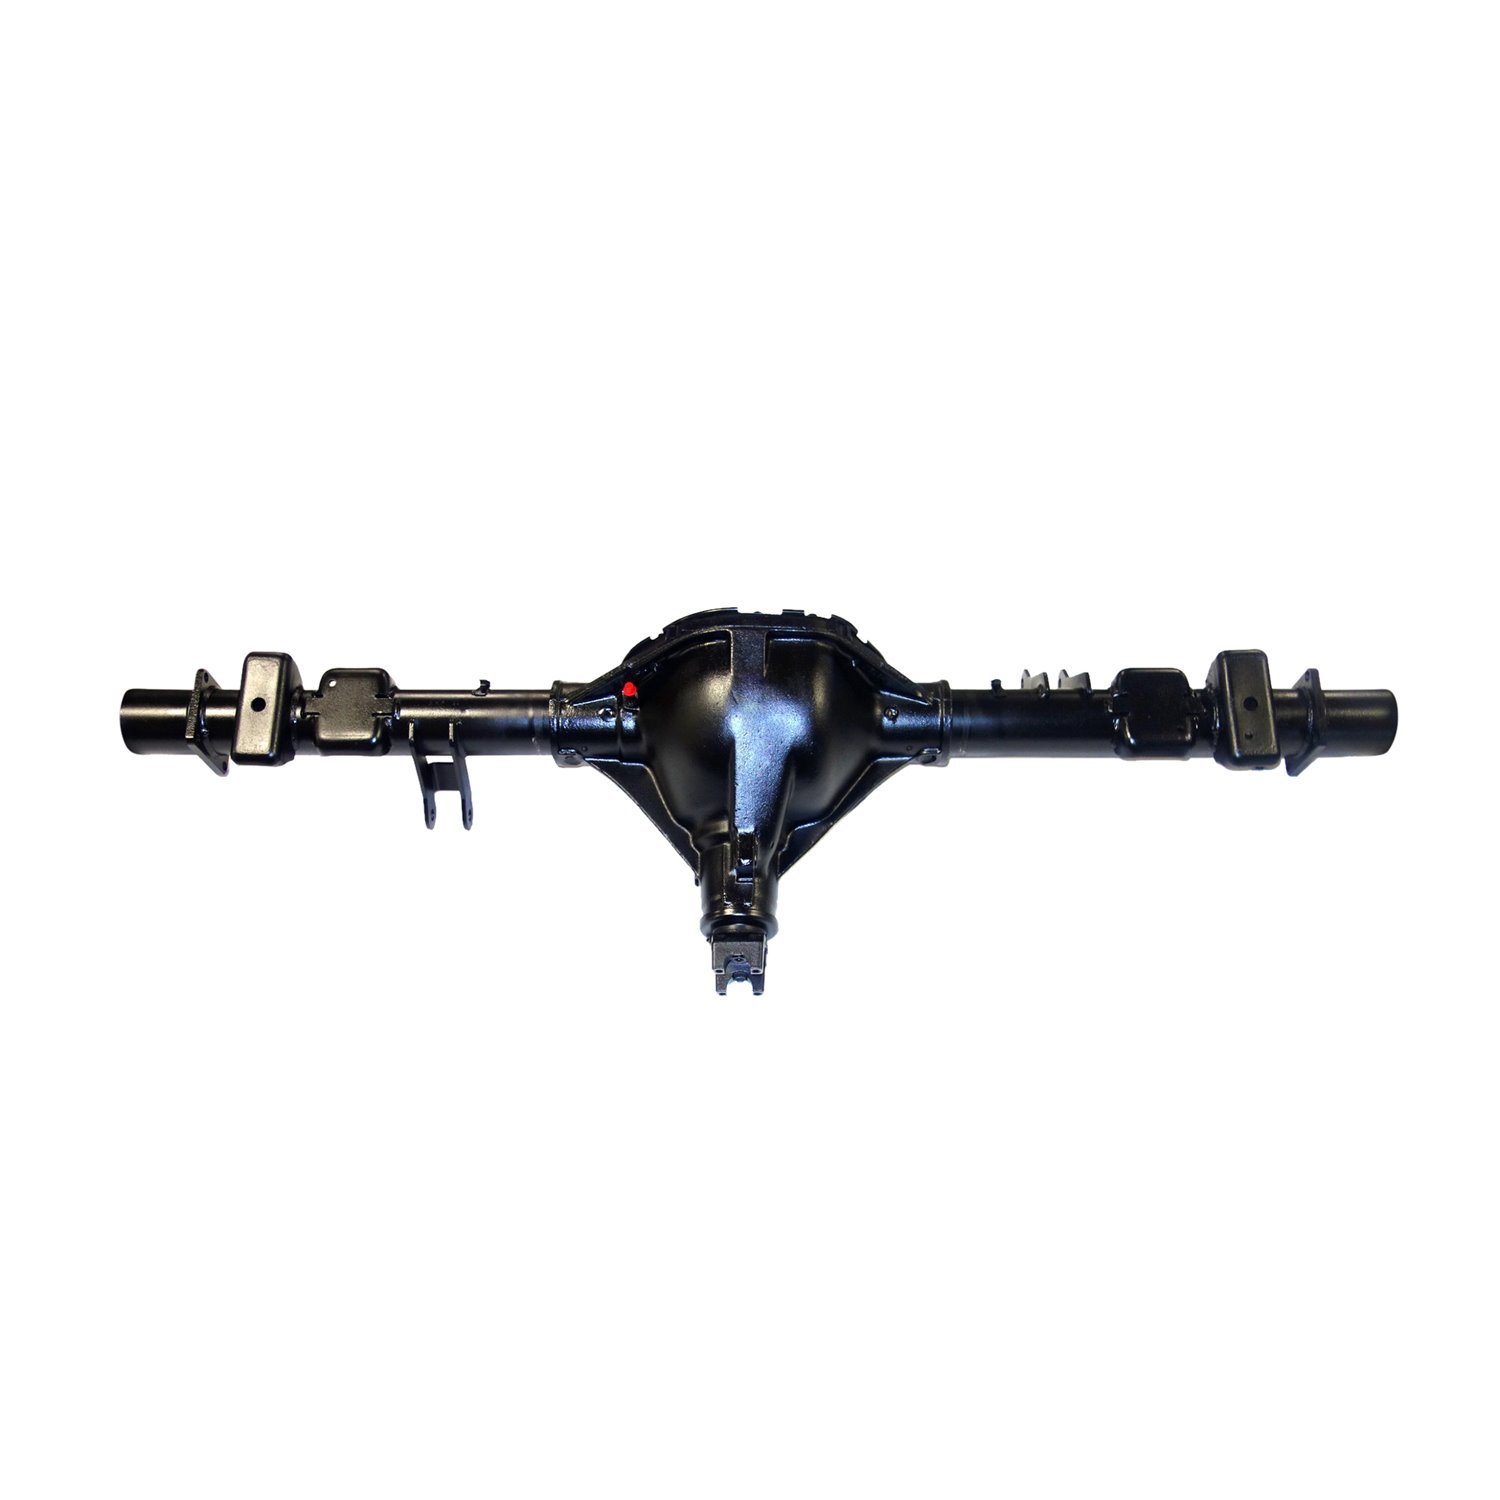 Remanufactured Axle Assy for GM 9.5" 10-14 GM 2500 & 3500 3.42 with Active Brake Control